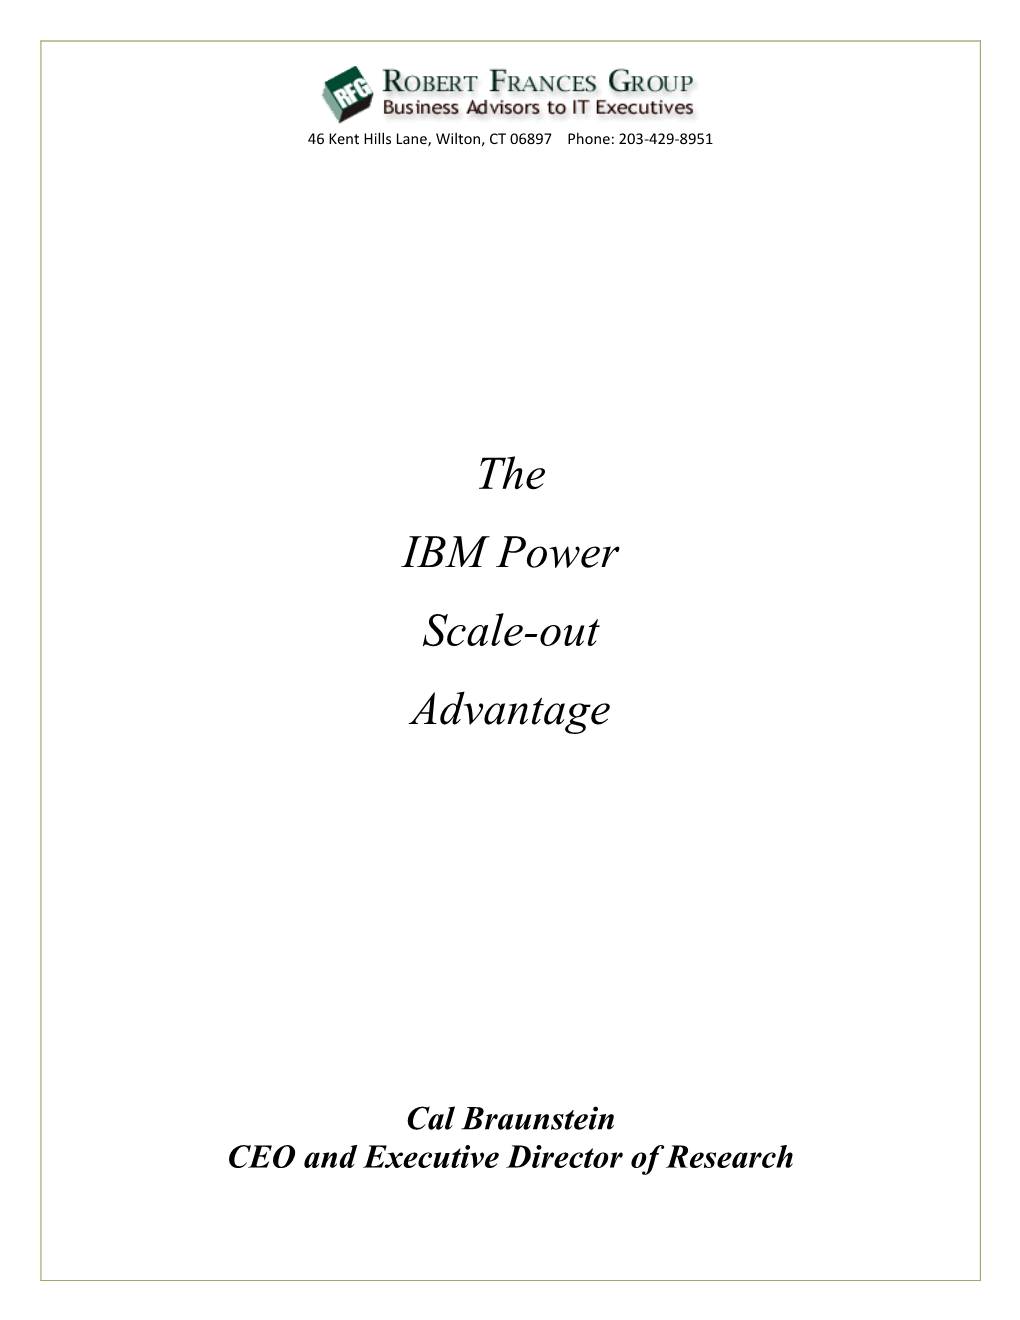 The IBM Power Scale-Out Advantage